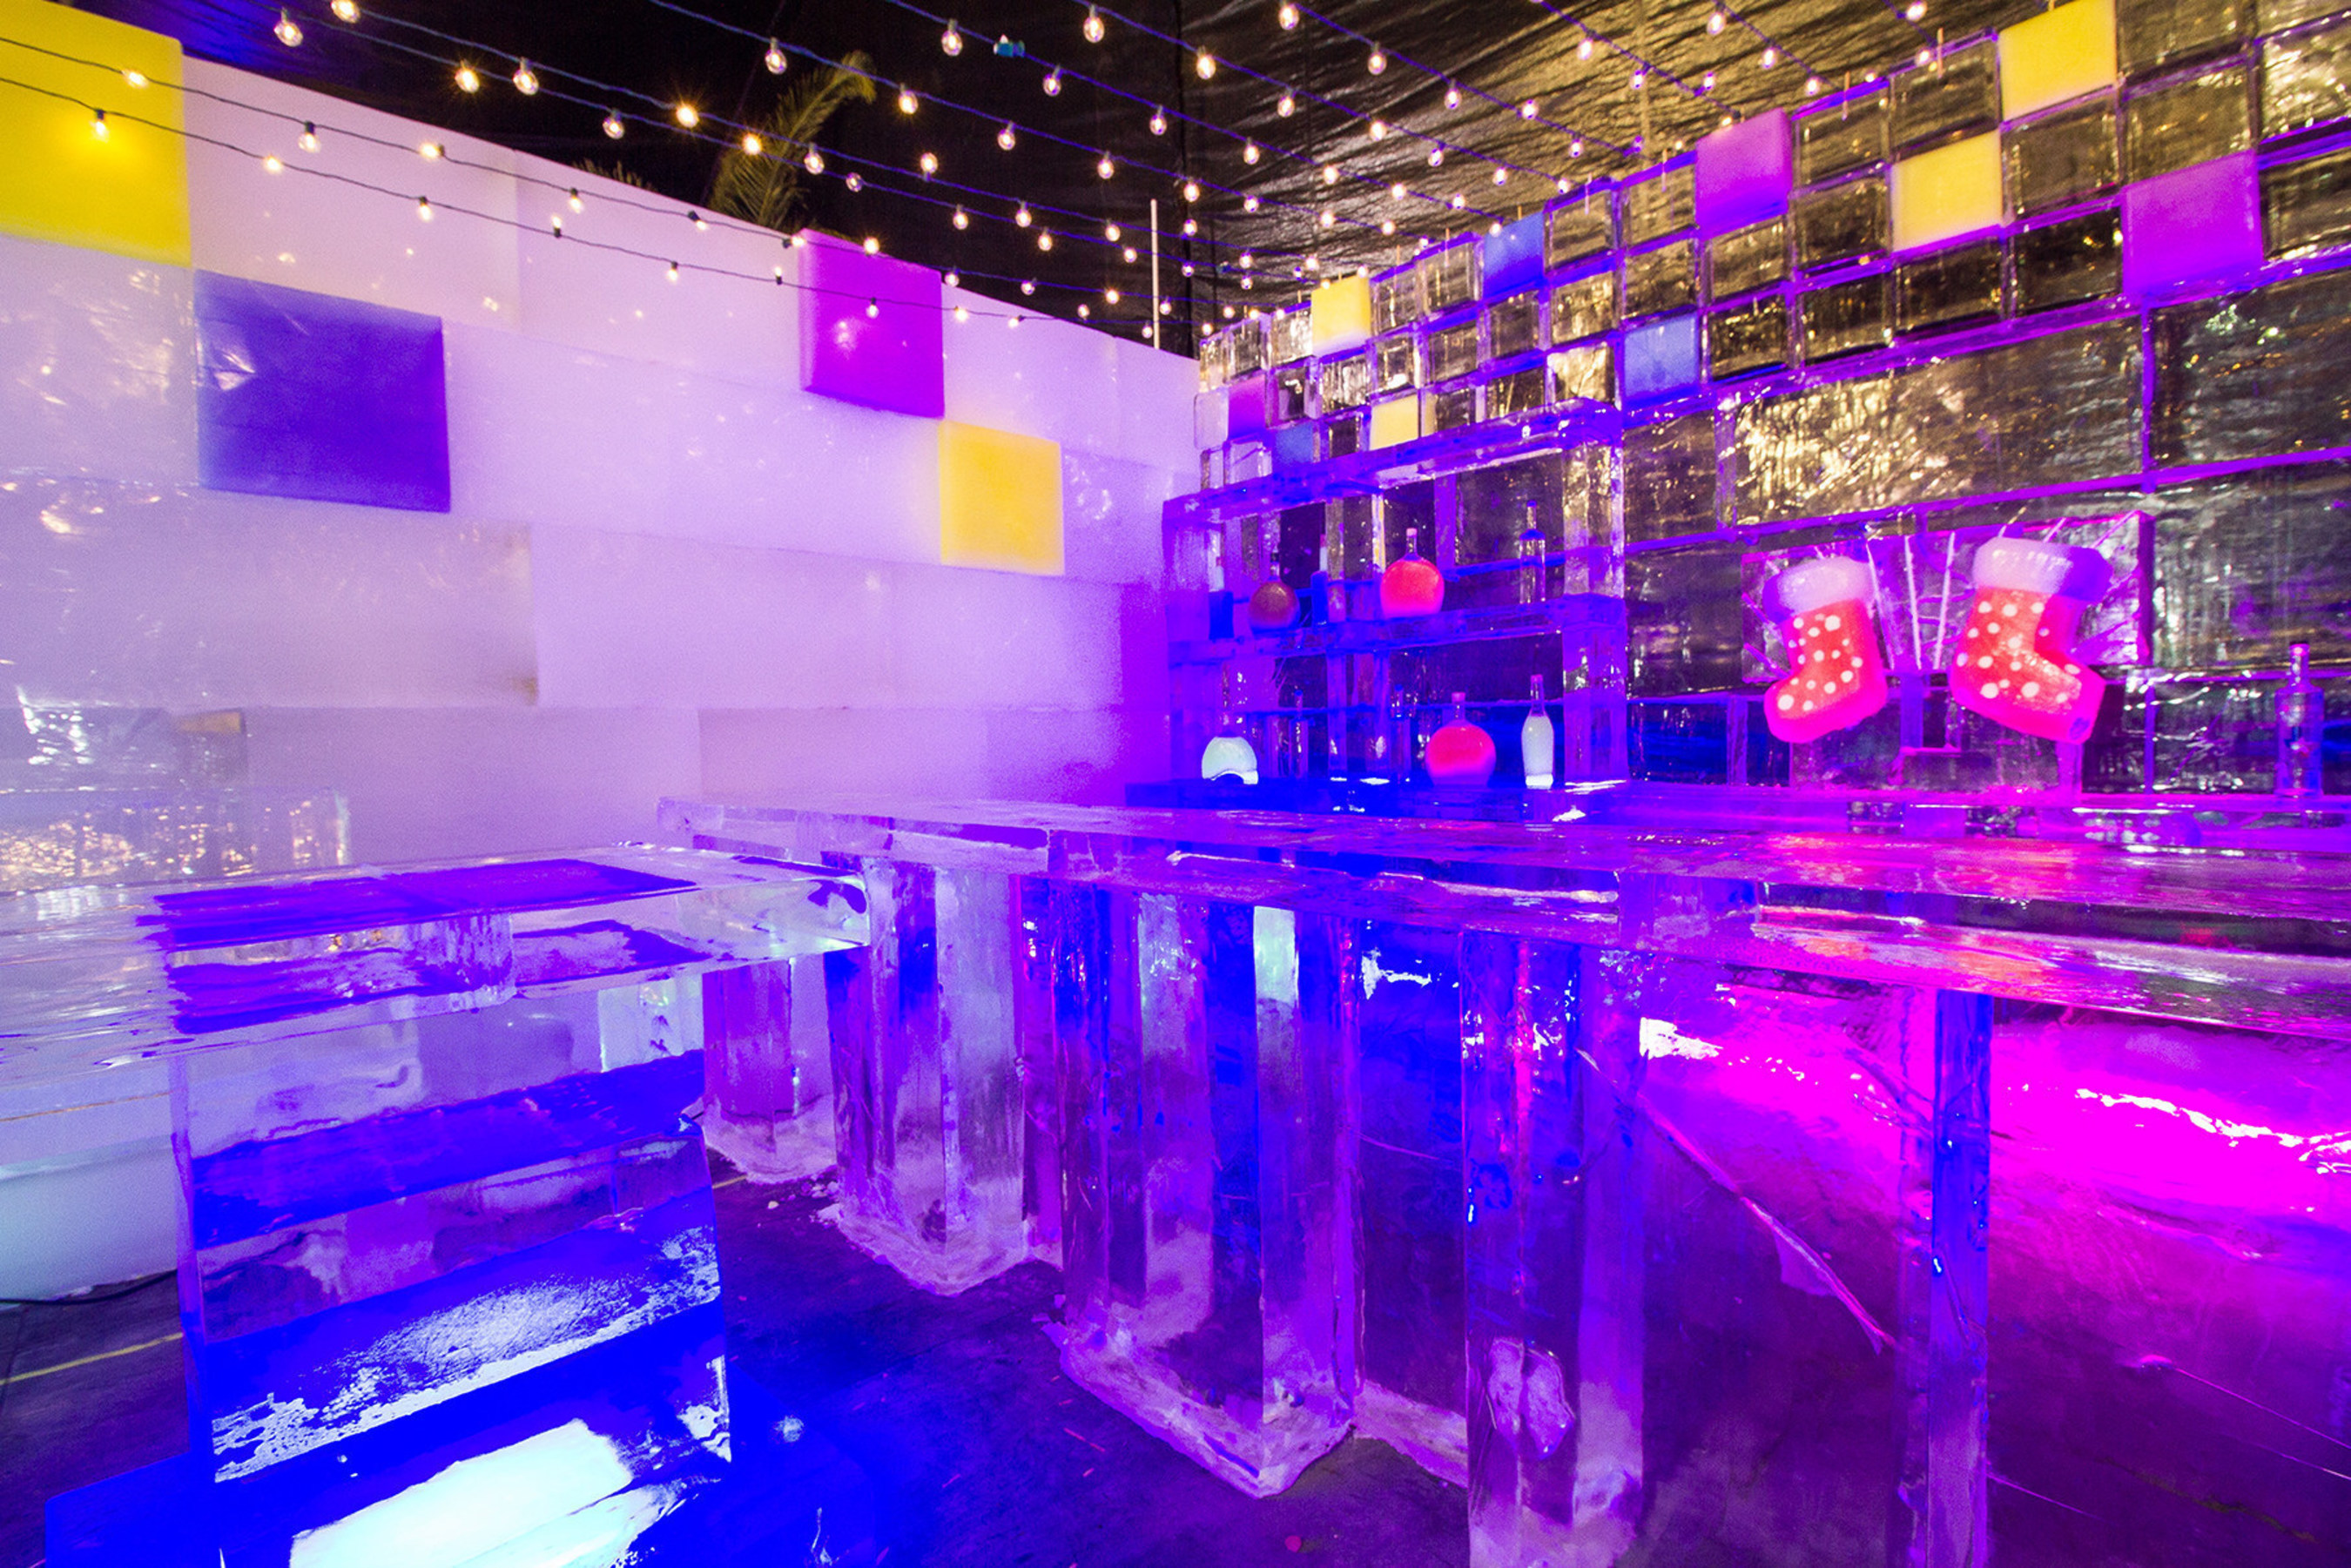 Shivers Ice Bar is one of the new features guests will experience at ICE LAND: Ice Sculptures when it opens Saturday, November 12 at Moody Gardens in Galveston, TX